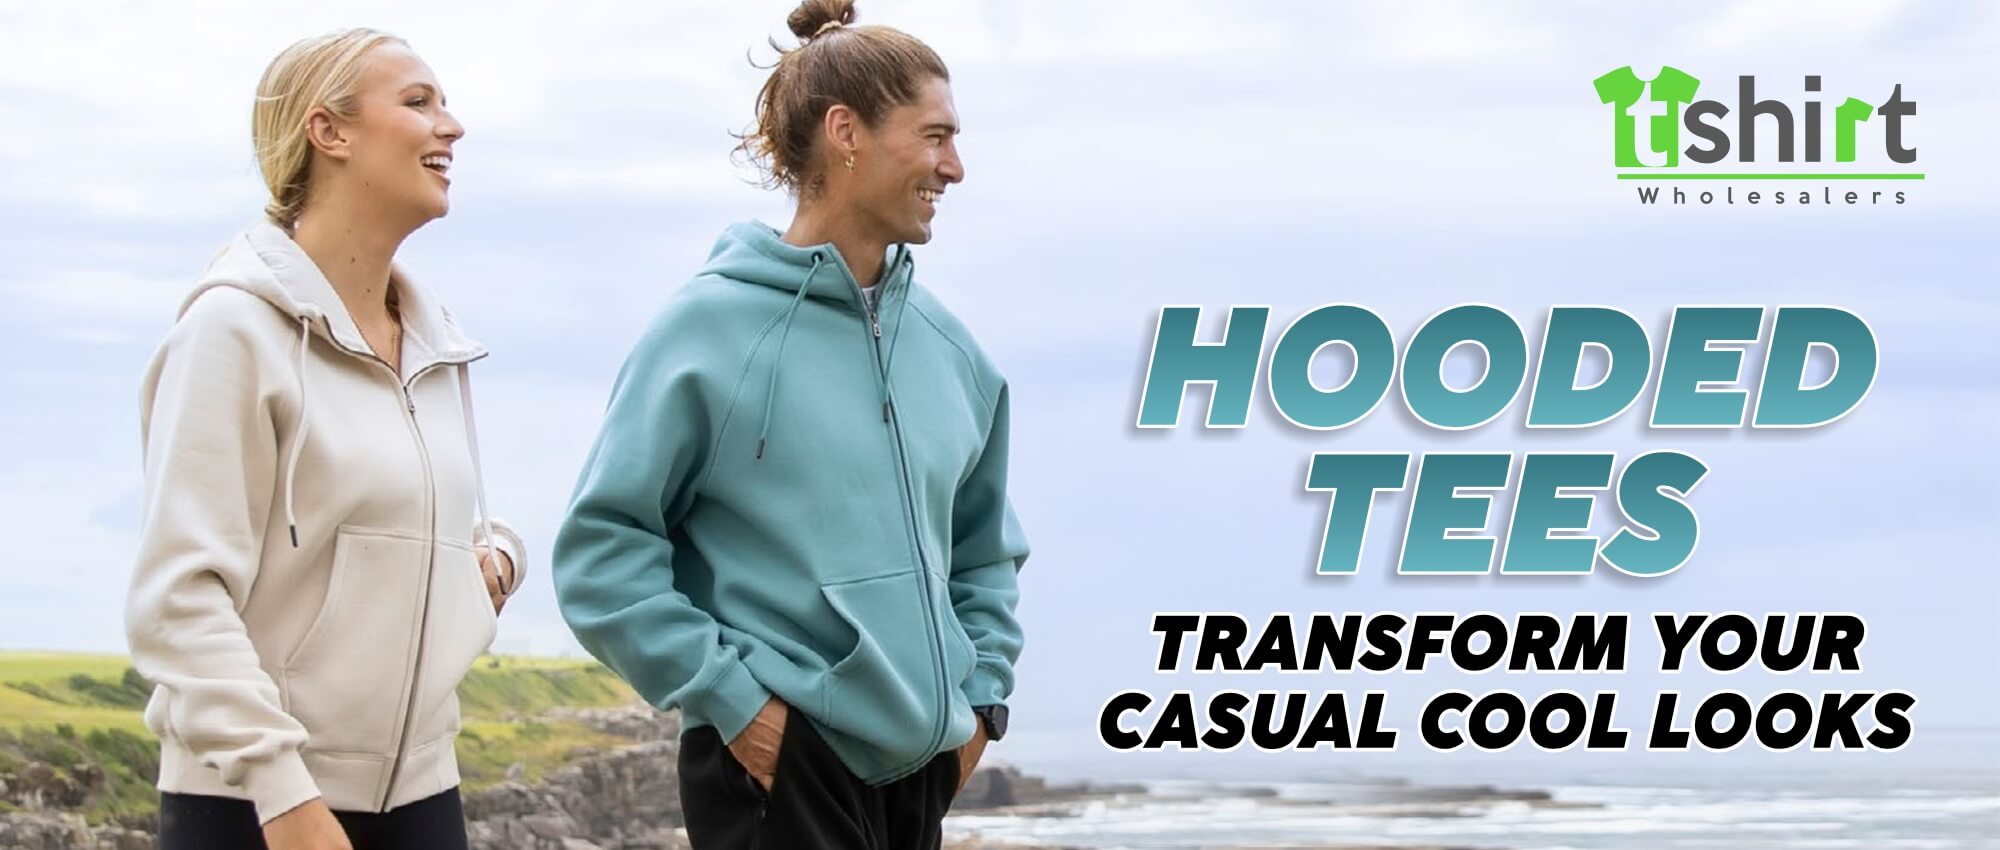 HOODED TEES TRANSFORM YOUR CASUAL COOL LOOKS